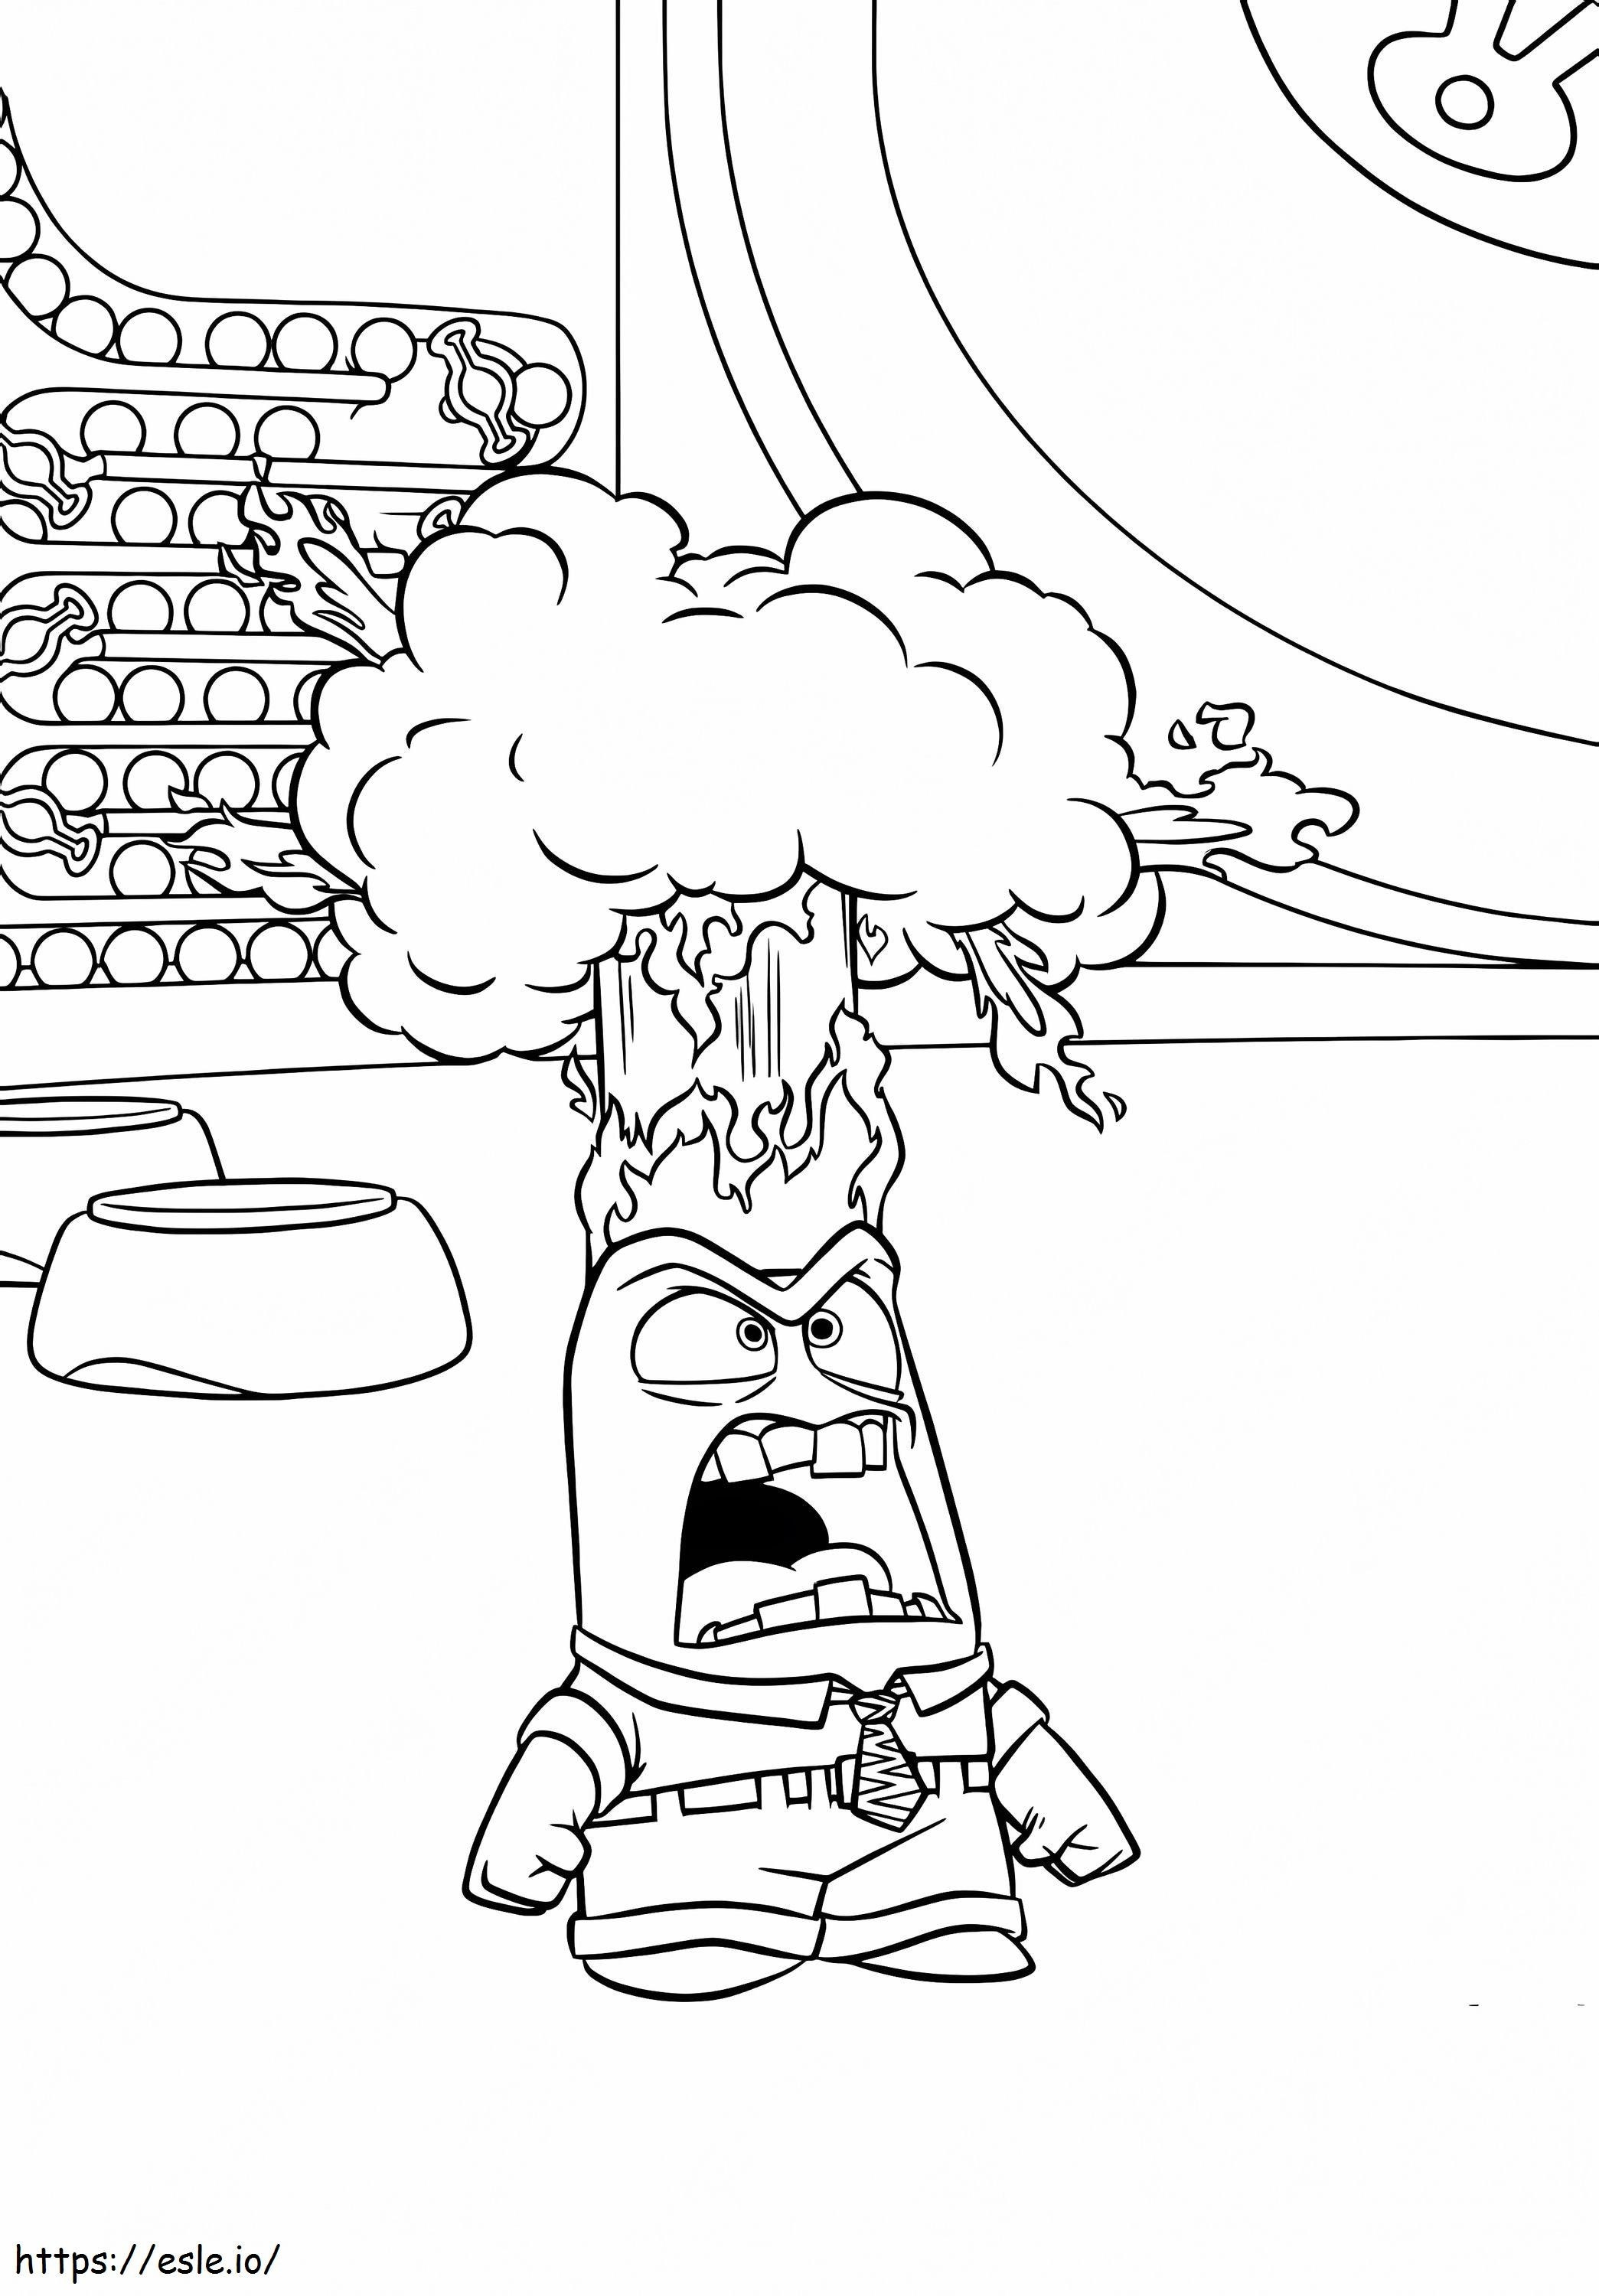 Angry Anger coloring page